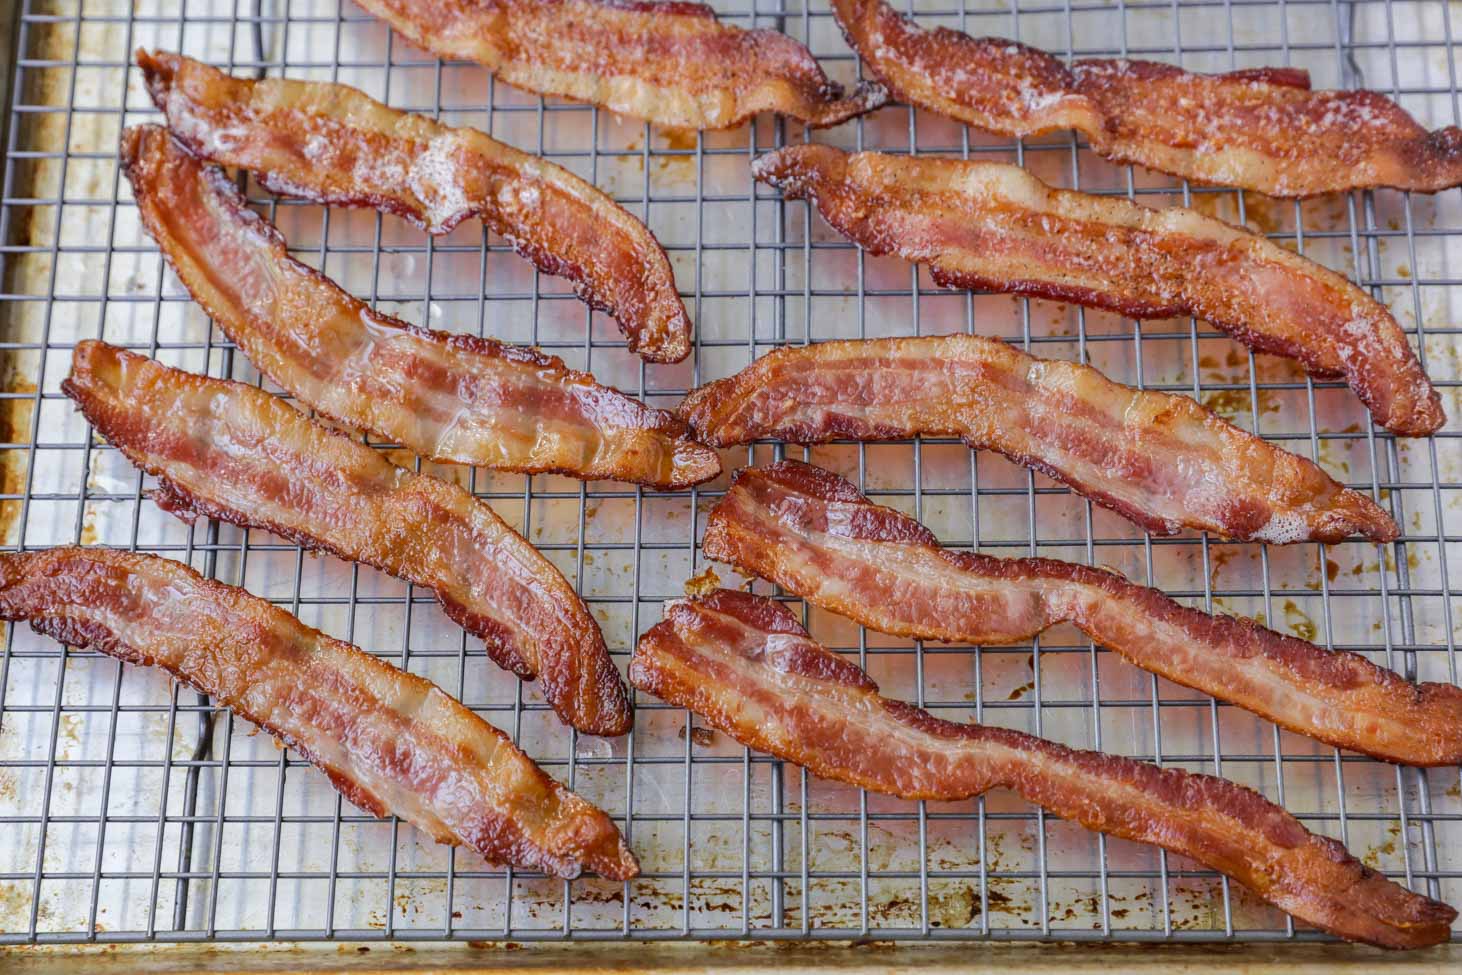 Cooked bacon placed on a wire rack on top of a sheet pan.